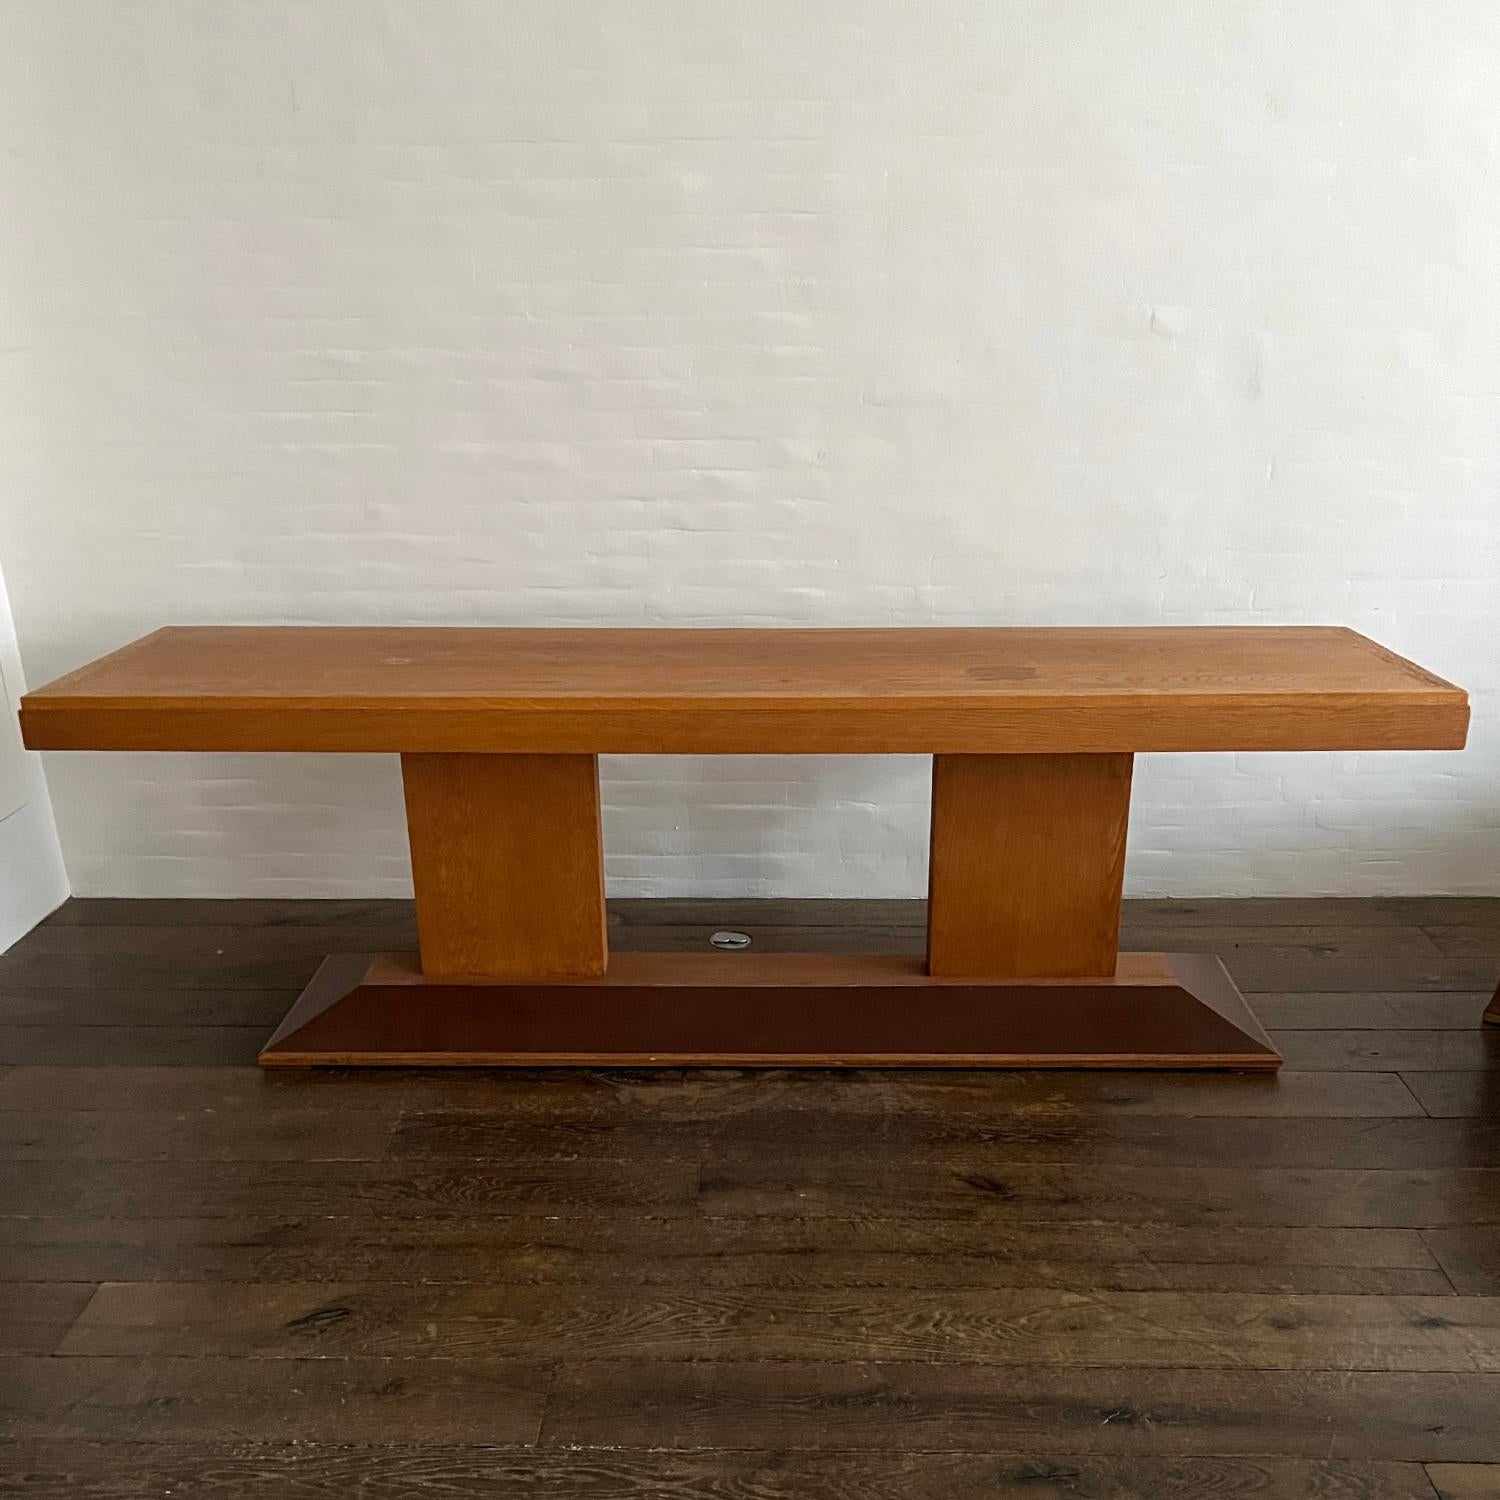 This beautiful and architectural antique console was sourced and and made in France and estimated to be from the 1940's. The oversized piece is made from natural French oak with an appropriately aged patina and a very handsome leather detailed base.